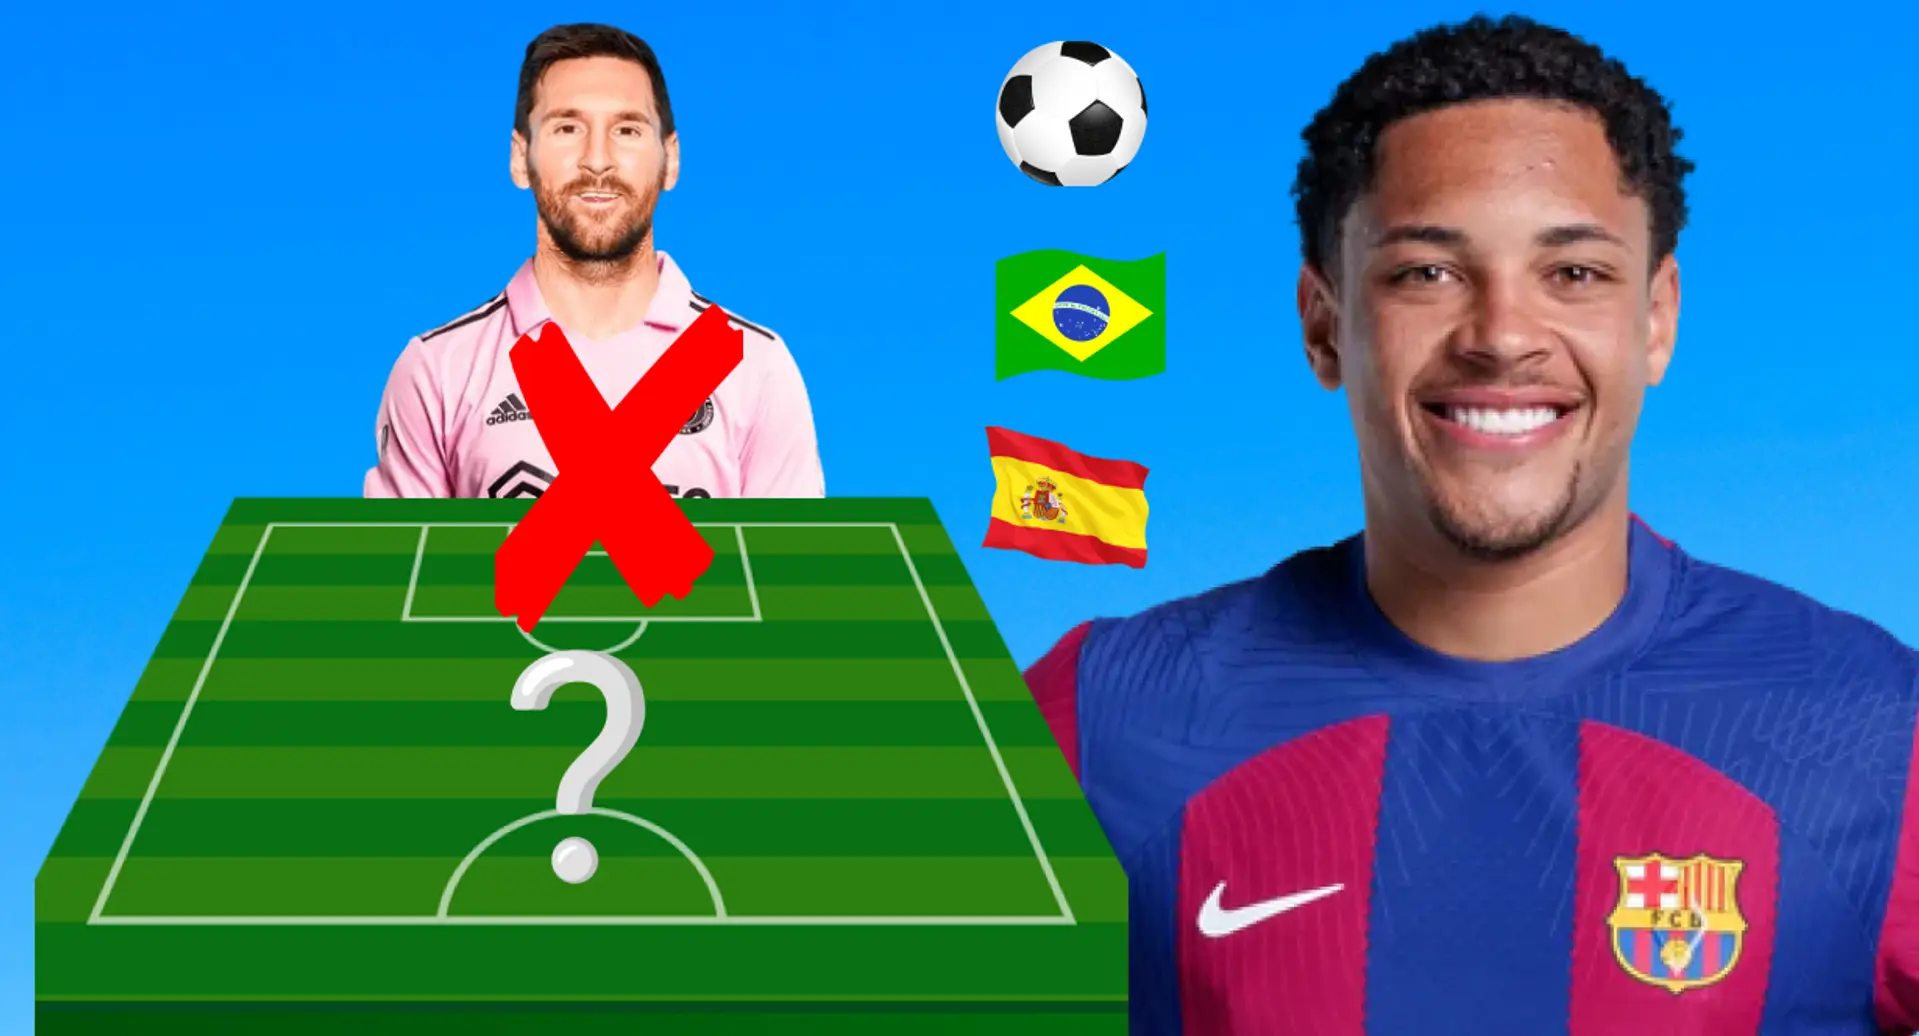 Vitor Roque reveals his top 5 all-time favourite players – no Messi there